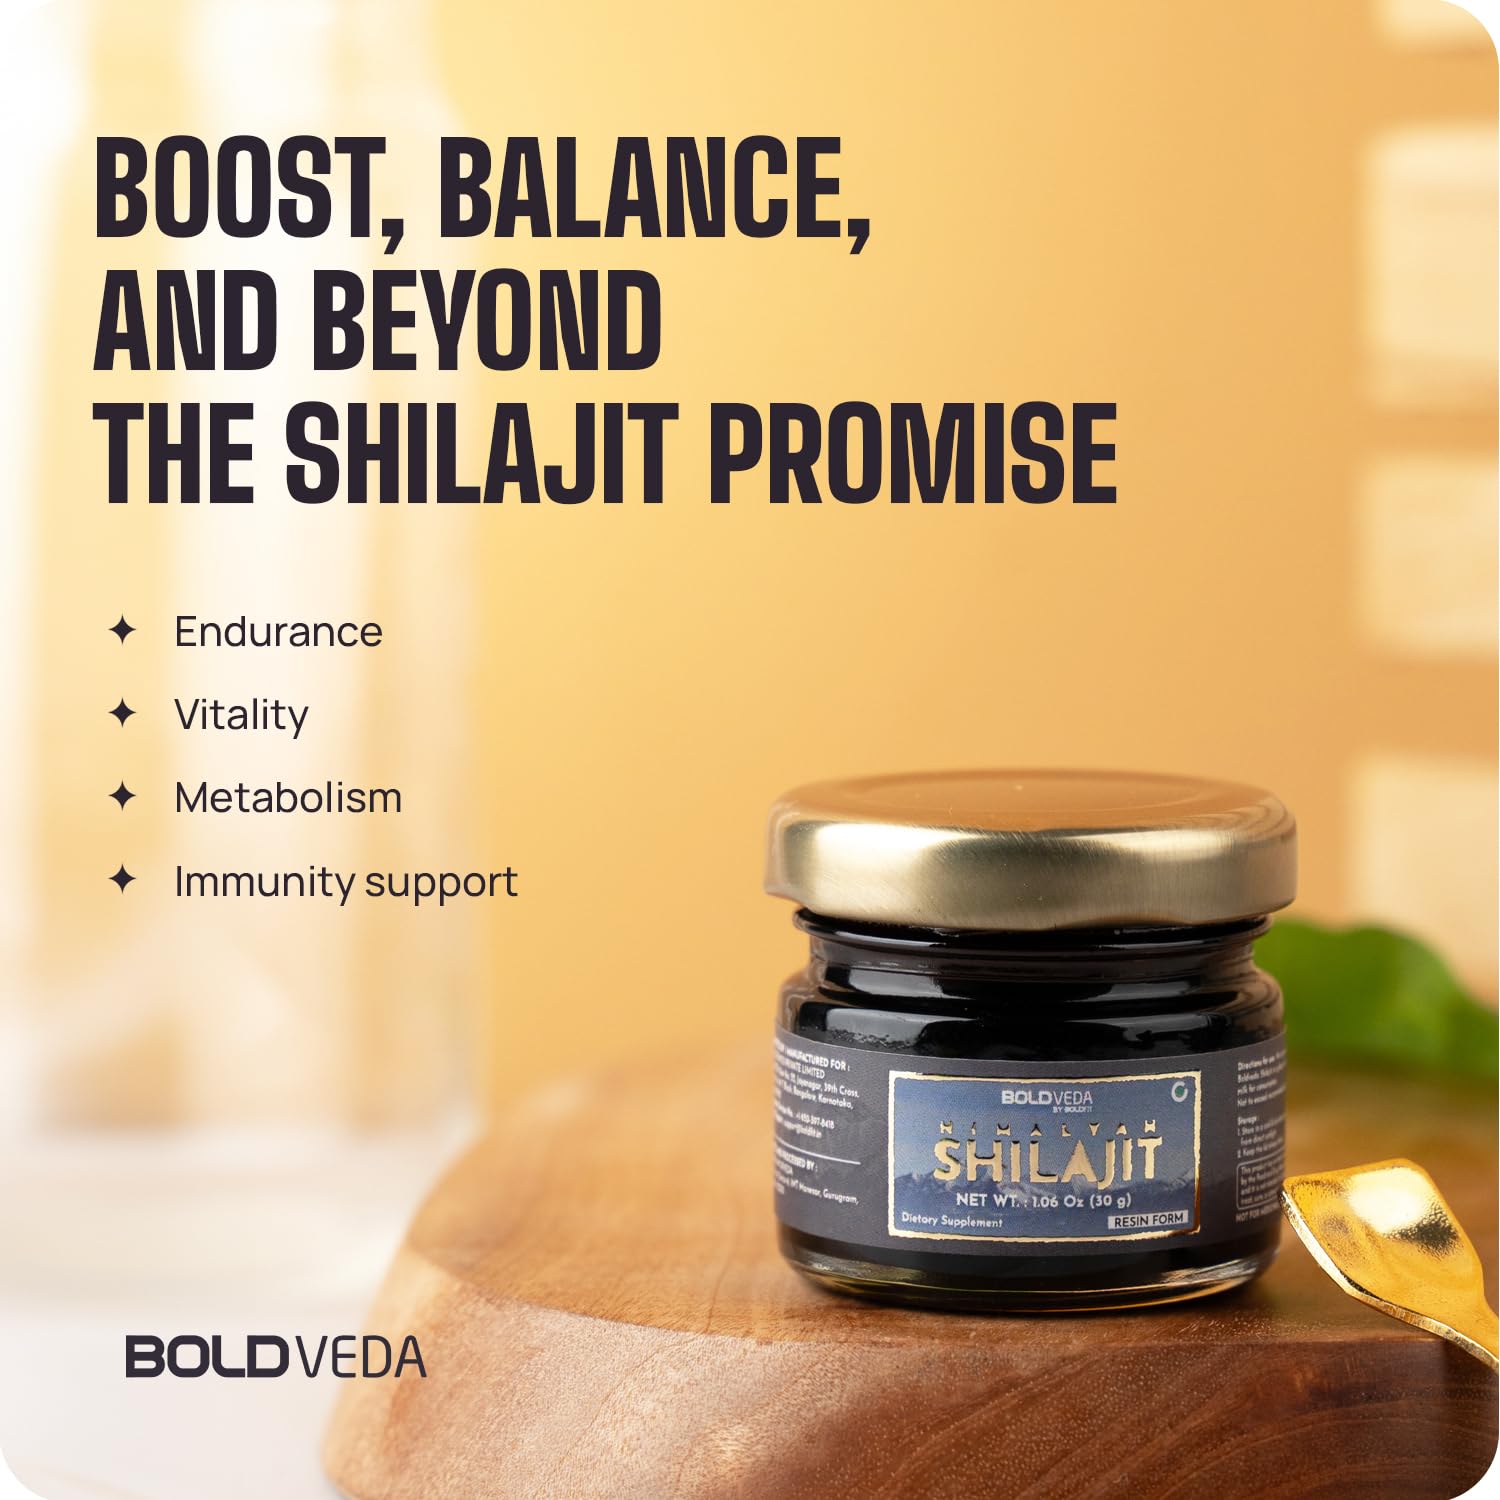 BOLDVEDA Shilajit Pure Himalayan Organic Resin - 30g Pure Natural Shilajit with Fulvic Acid and Trace Minerals - Authentic Resin to Improve Daily Wellness - Vital Herbs Shilajit Supplement for Men